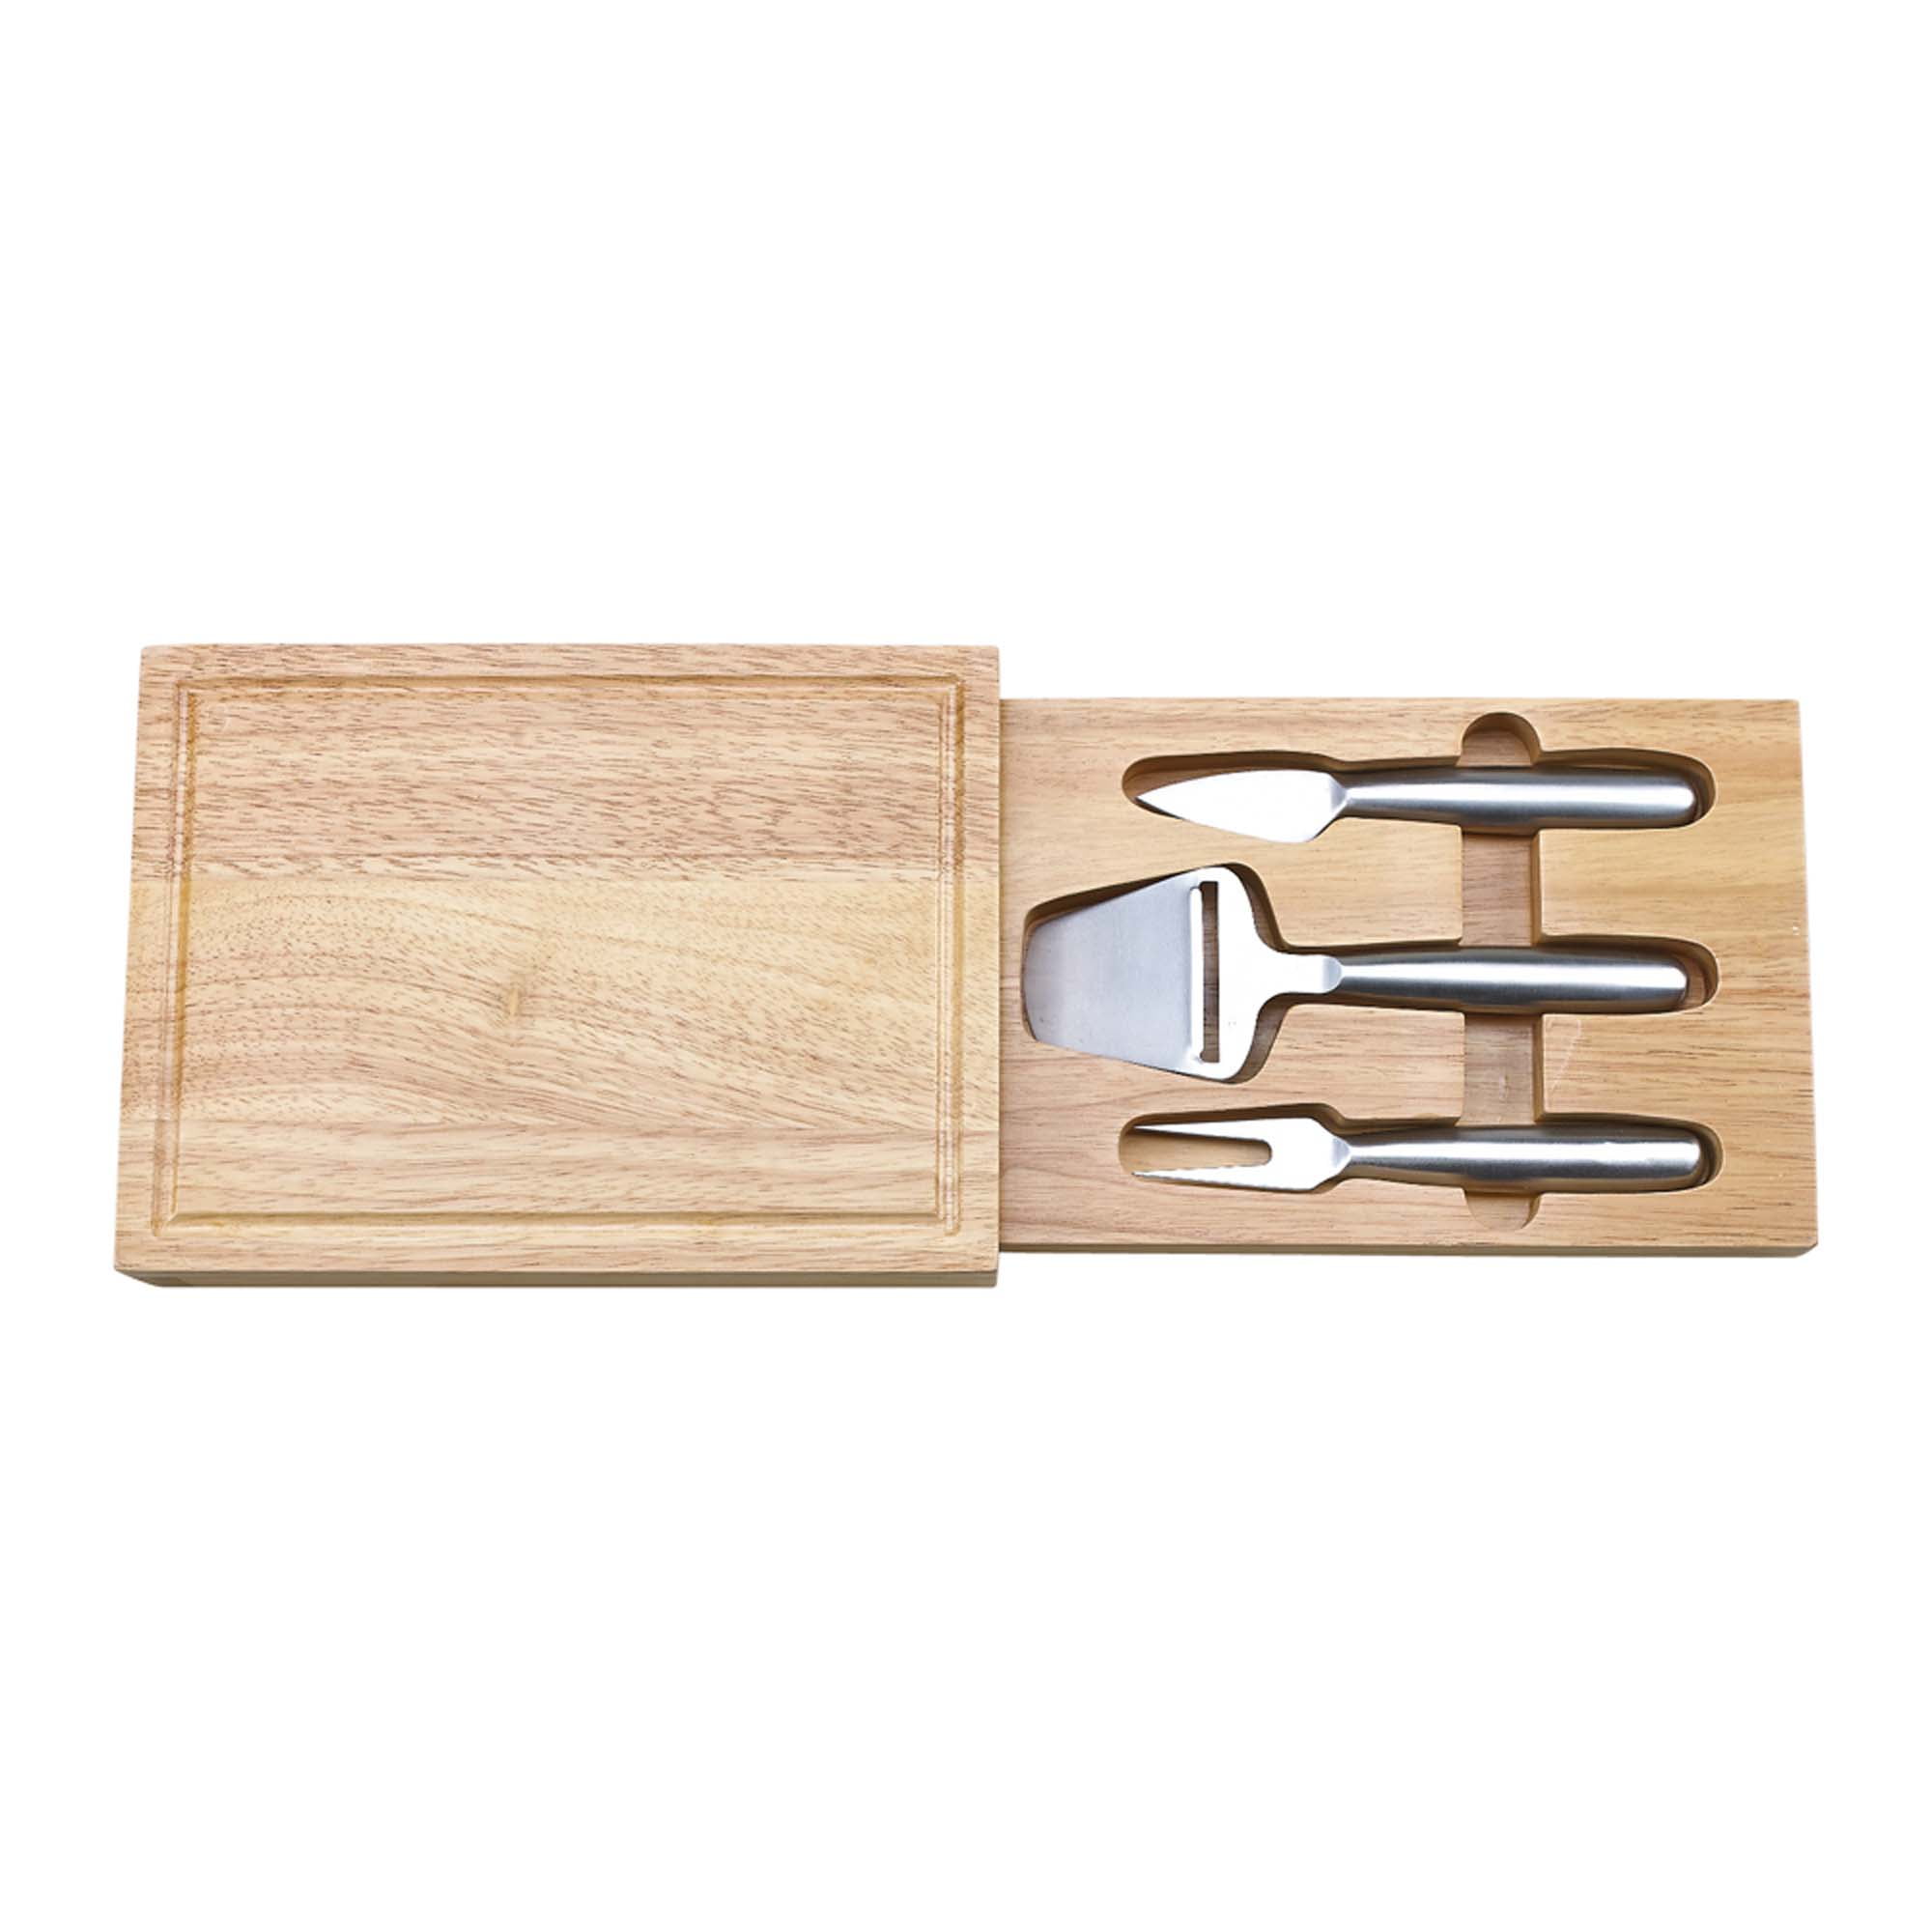 015819 3 Piece Rectangle Wood Cheeseboard With Stainless Steel Handle Utensils